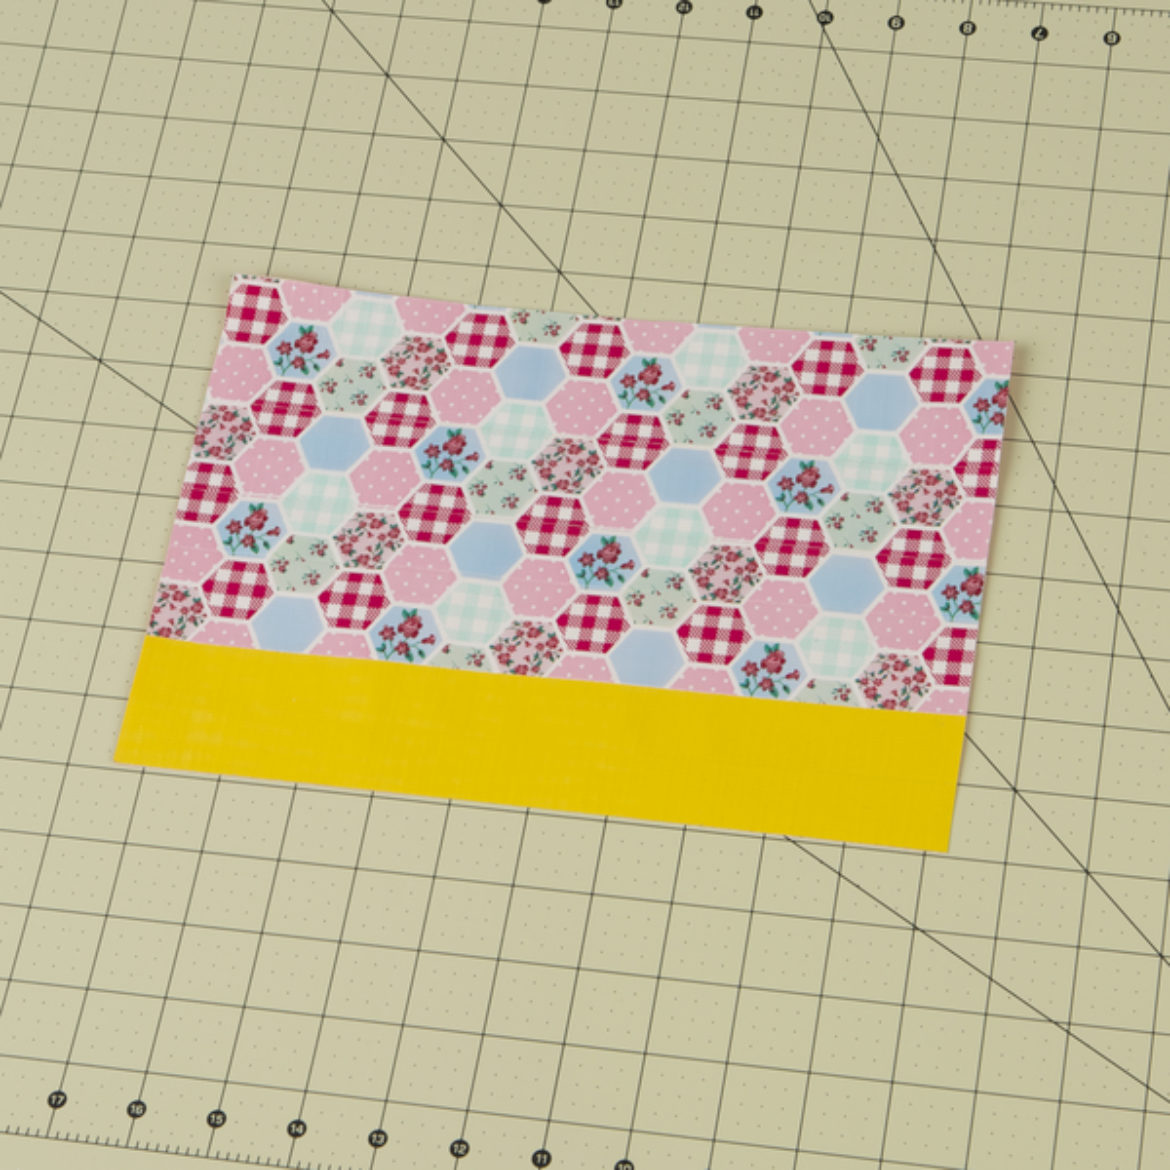 Duck Tape fabric with a strip of yellow Duck Tape at the bottom